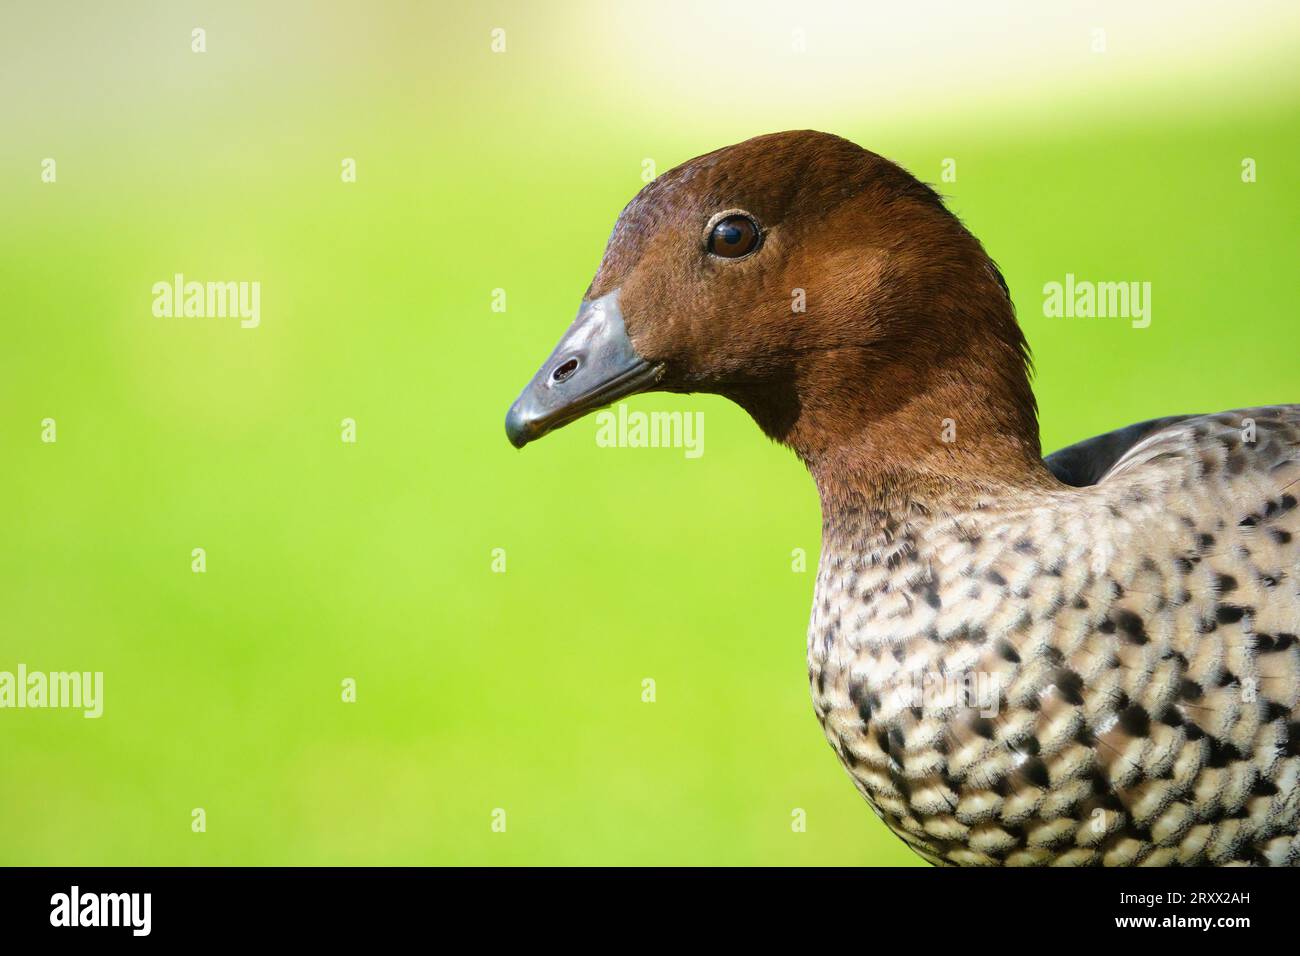 Close-up portrait of a male Australian Wood Duck, Chenonetta jubata, also known as Maned Duck and Maned Goose. Stock Photo